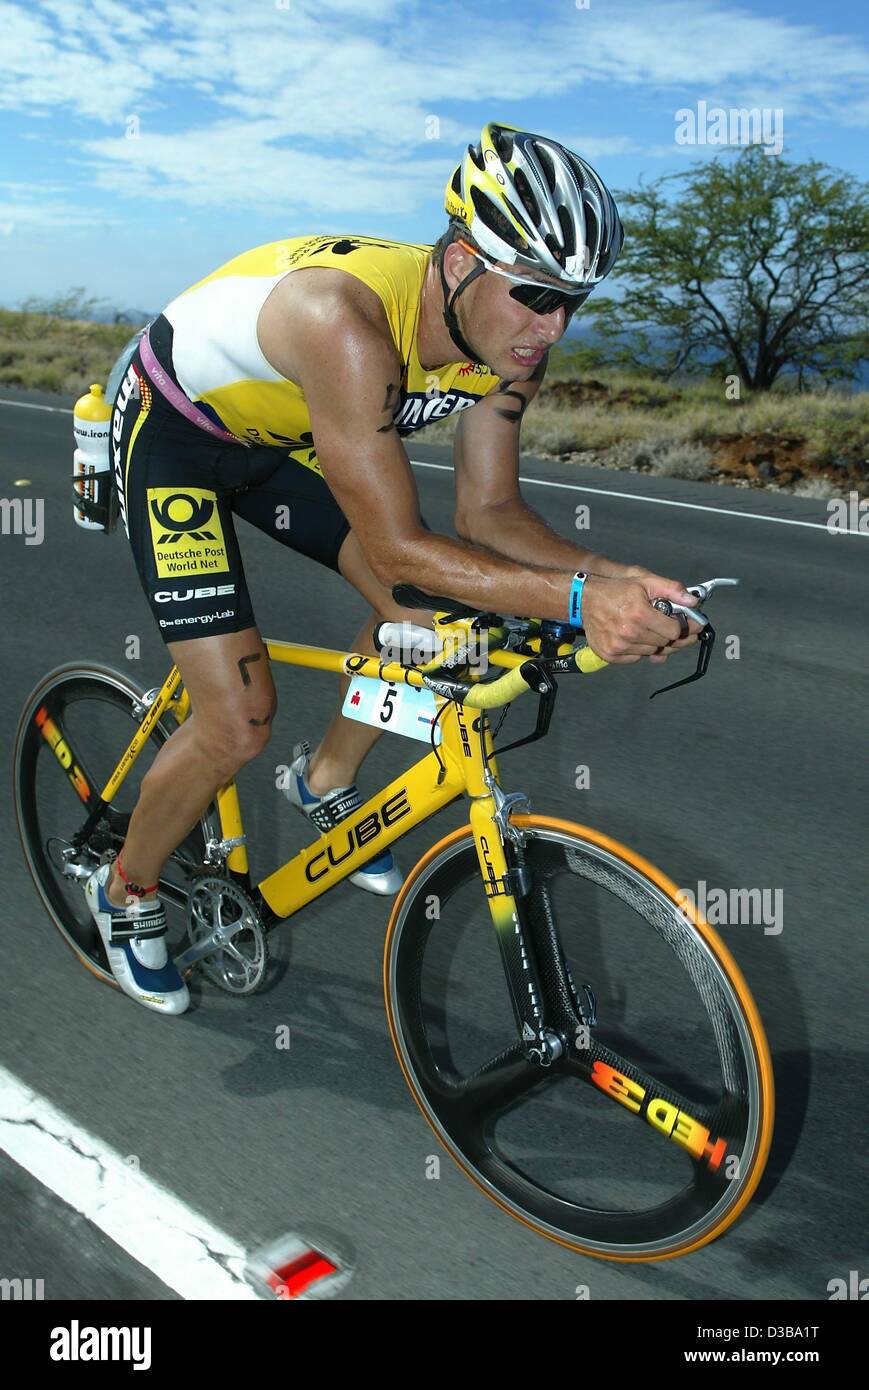 (dpa) - German athlete Lothar Leder cycles through the lava desert during the Ironman Triathlon World Championship in Kailua-Kona, Hawaii, 19 October 2002. Leder, who was one of the favorites to win, placed 38th in the end. Stock Photo